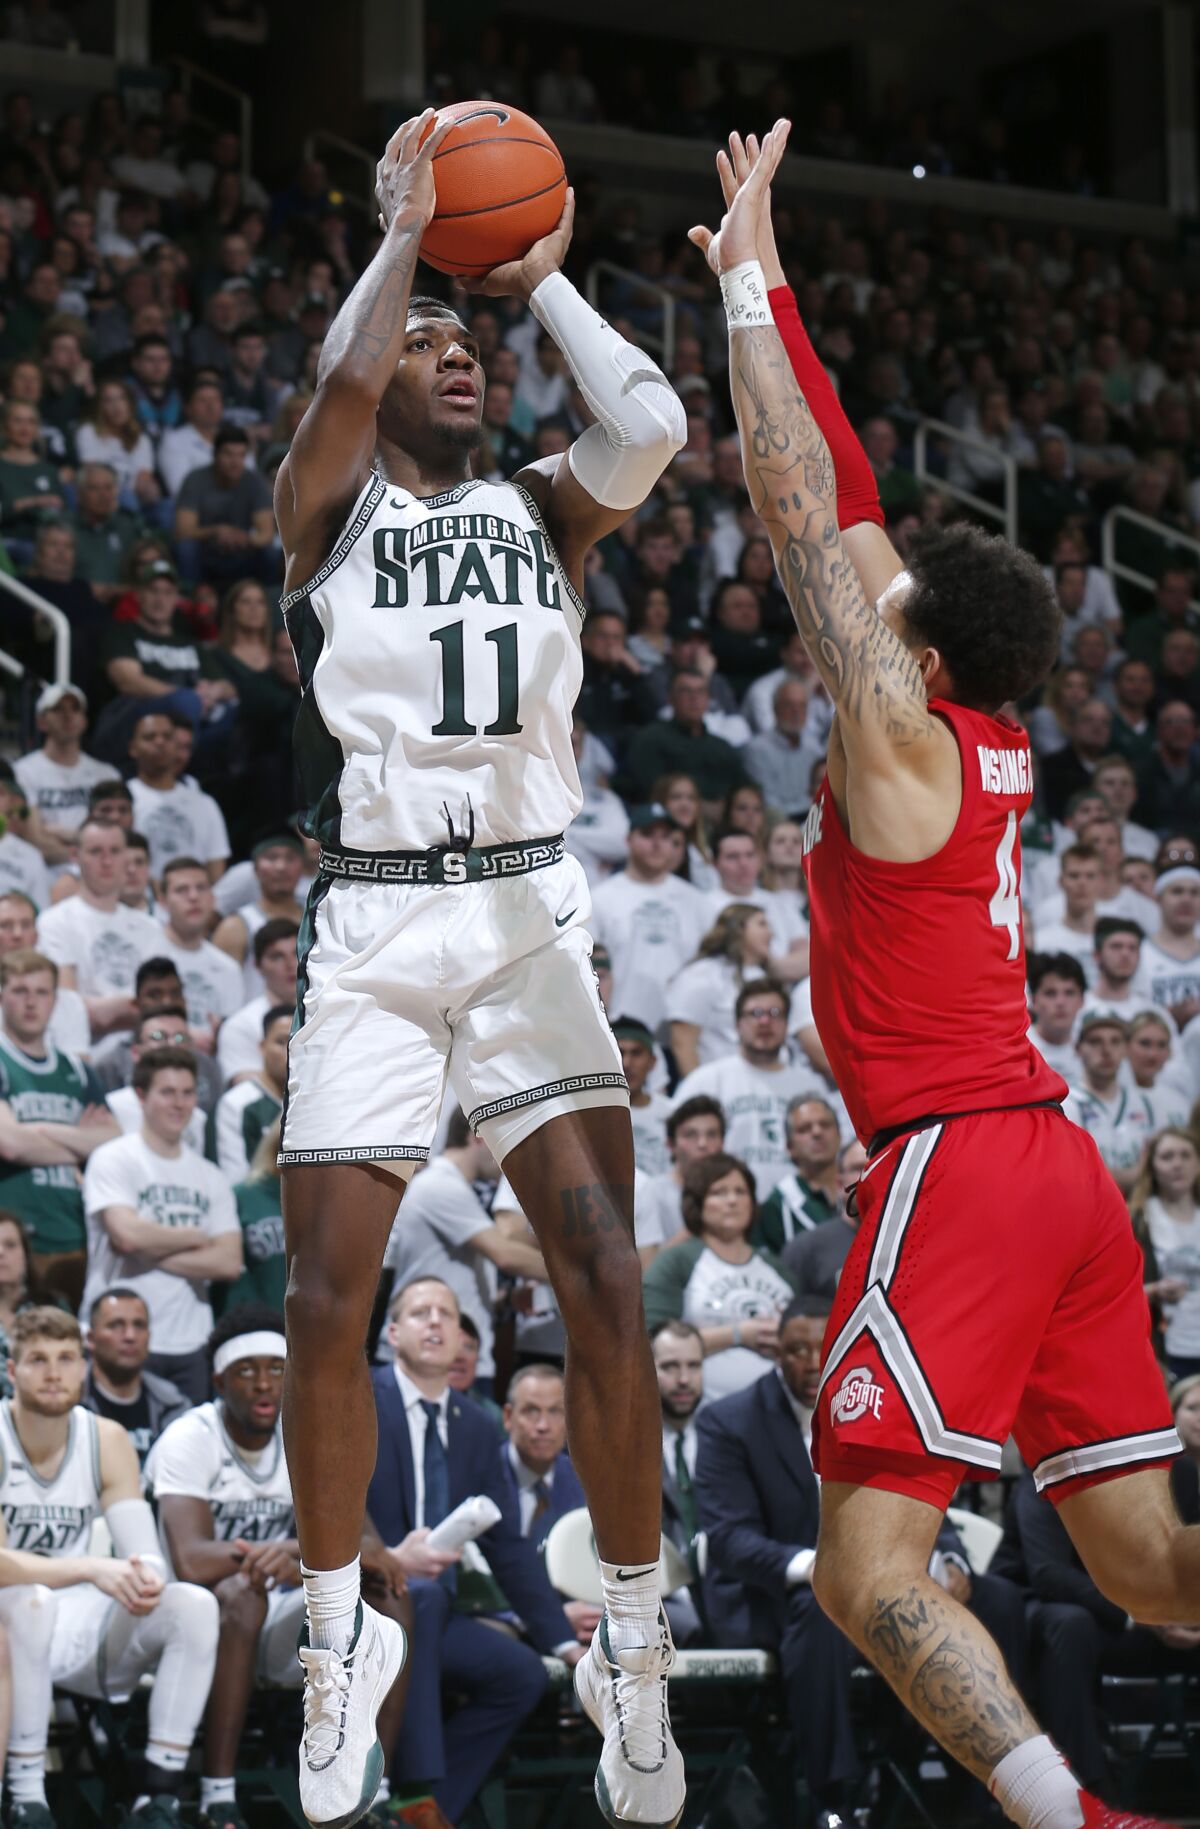 FILE - Michigan State's Aaron Henry, left, shoots against Ohio State's Duane Washington Jr. during the second half of an NCAA college basketball game in East Lansing, Mich., in this Sunday, March 8, 2020, file photo. Michigan State won 80-69. The team will need preseason All-Big Ten player Aaron Henry to produce much more than he has in the past as a role player.(AP Photo/Al Goldis, File)